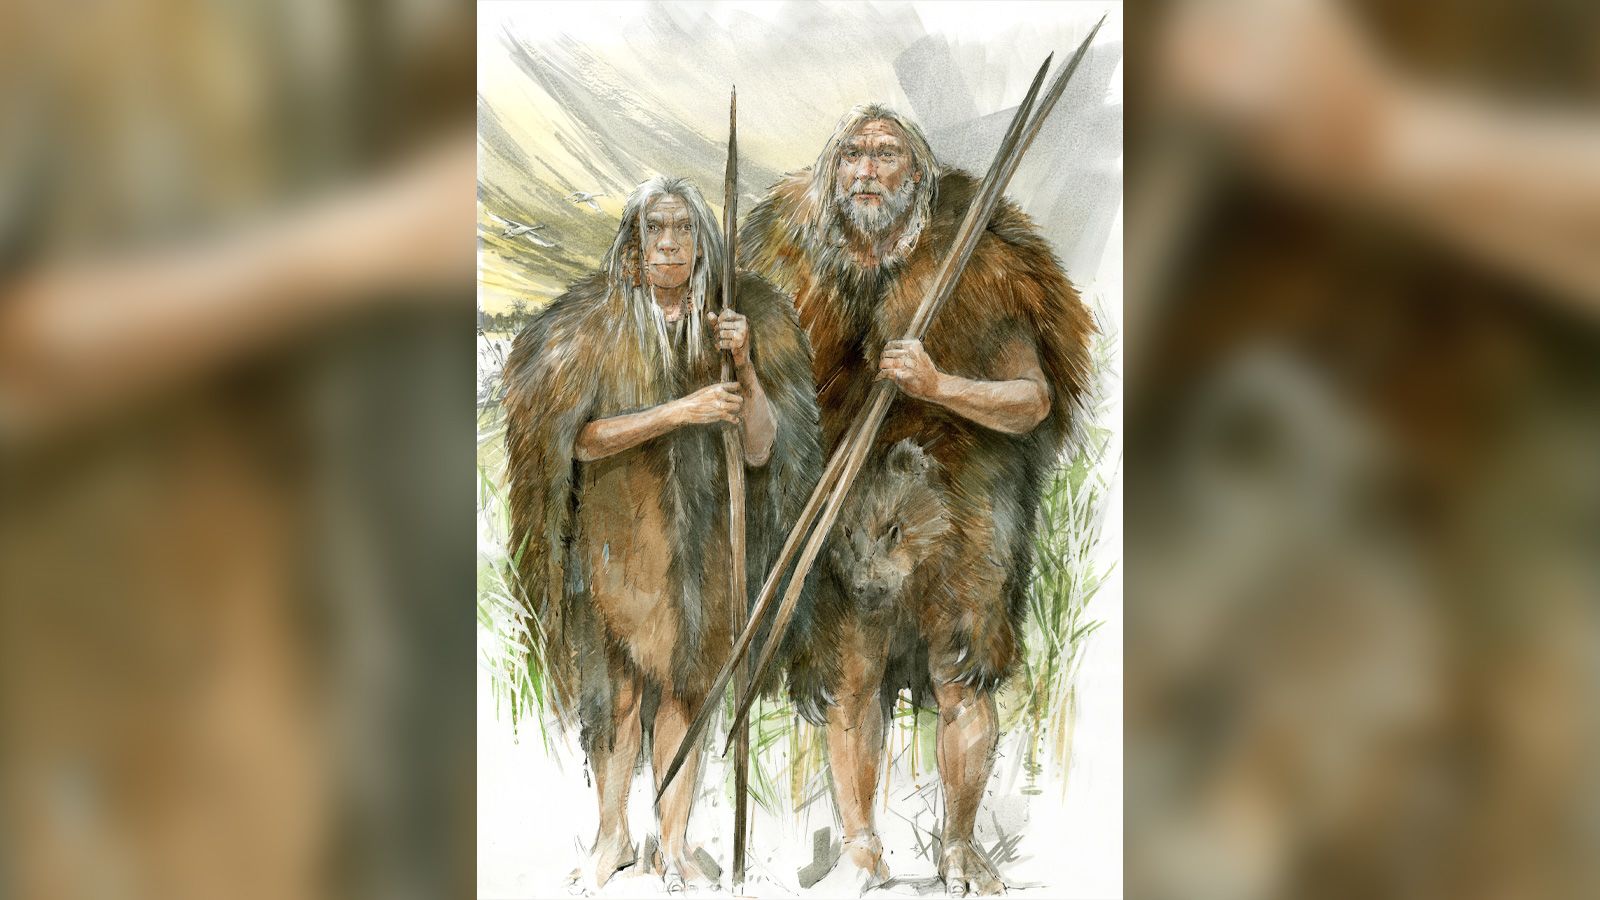 stone age tribe discovered